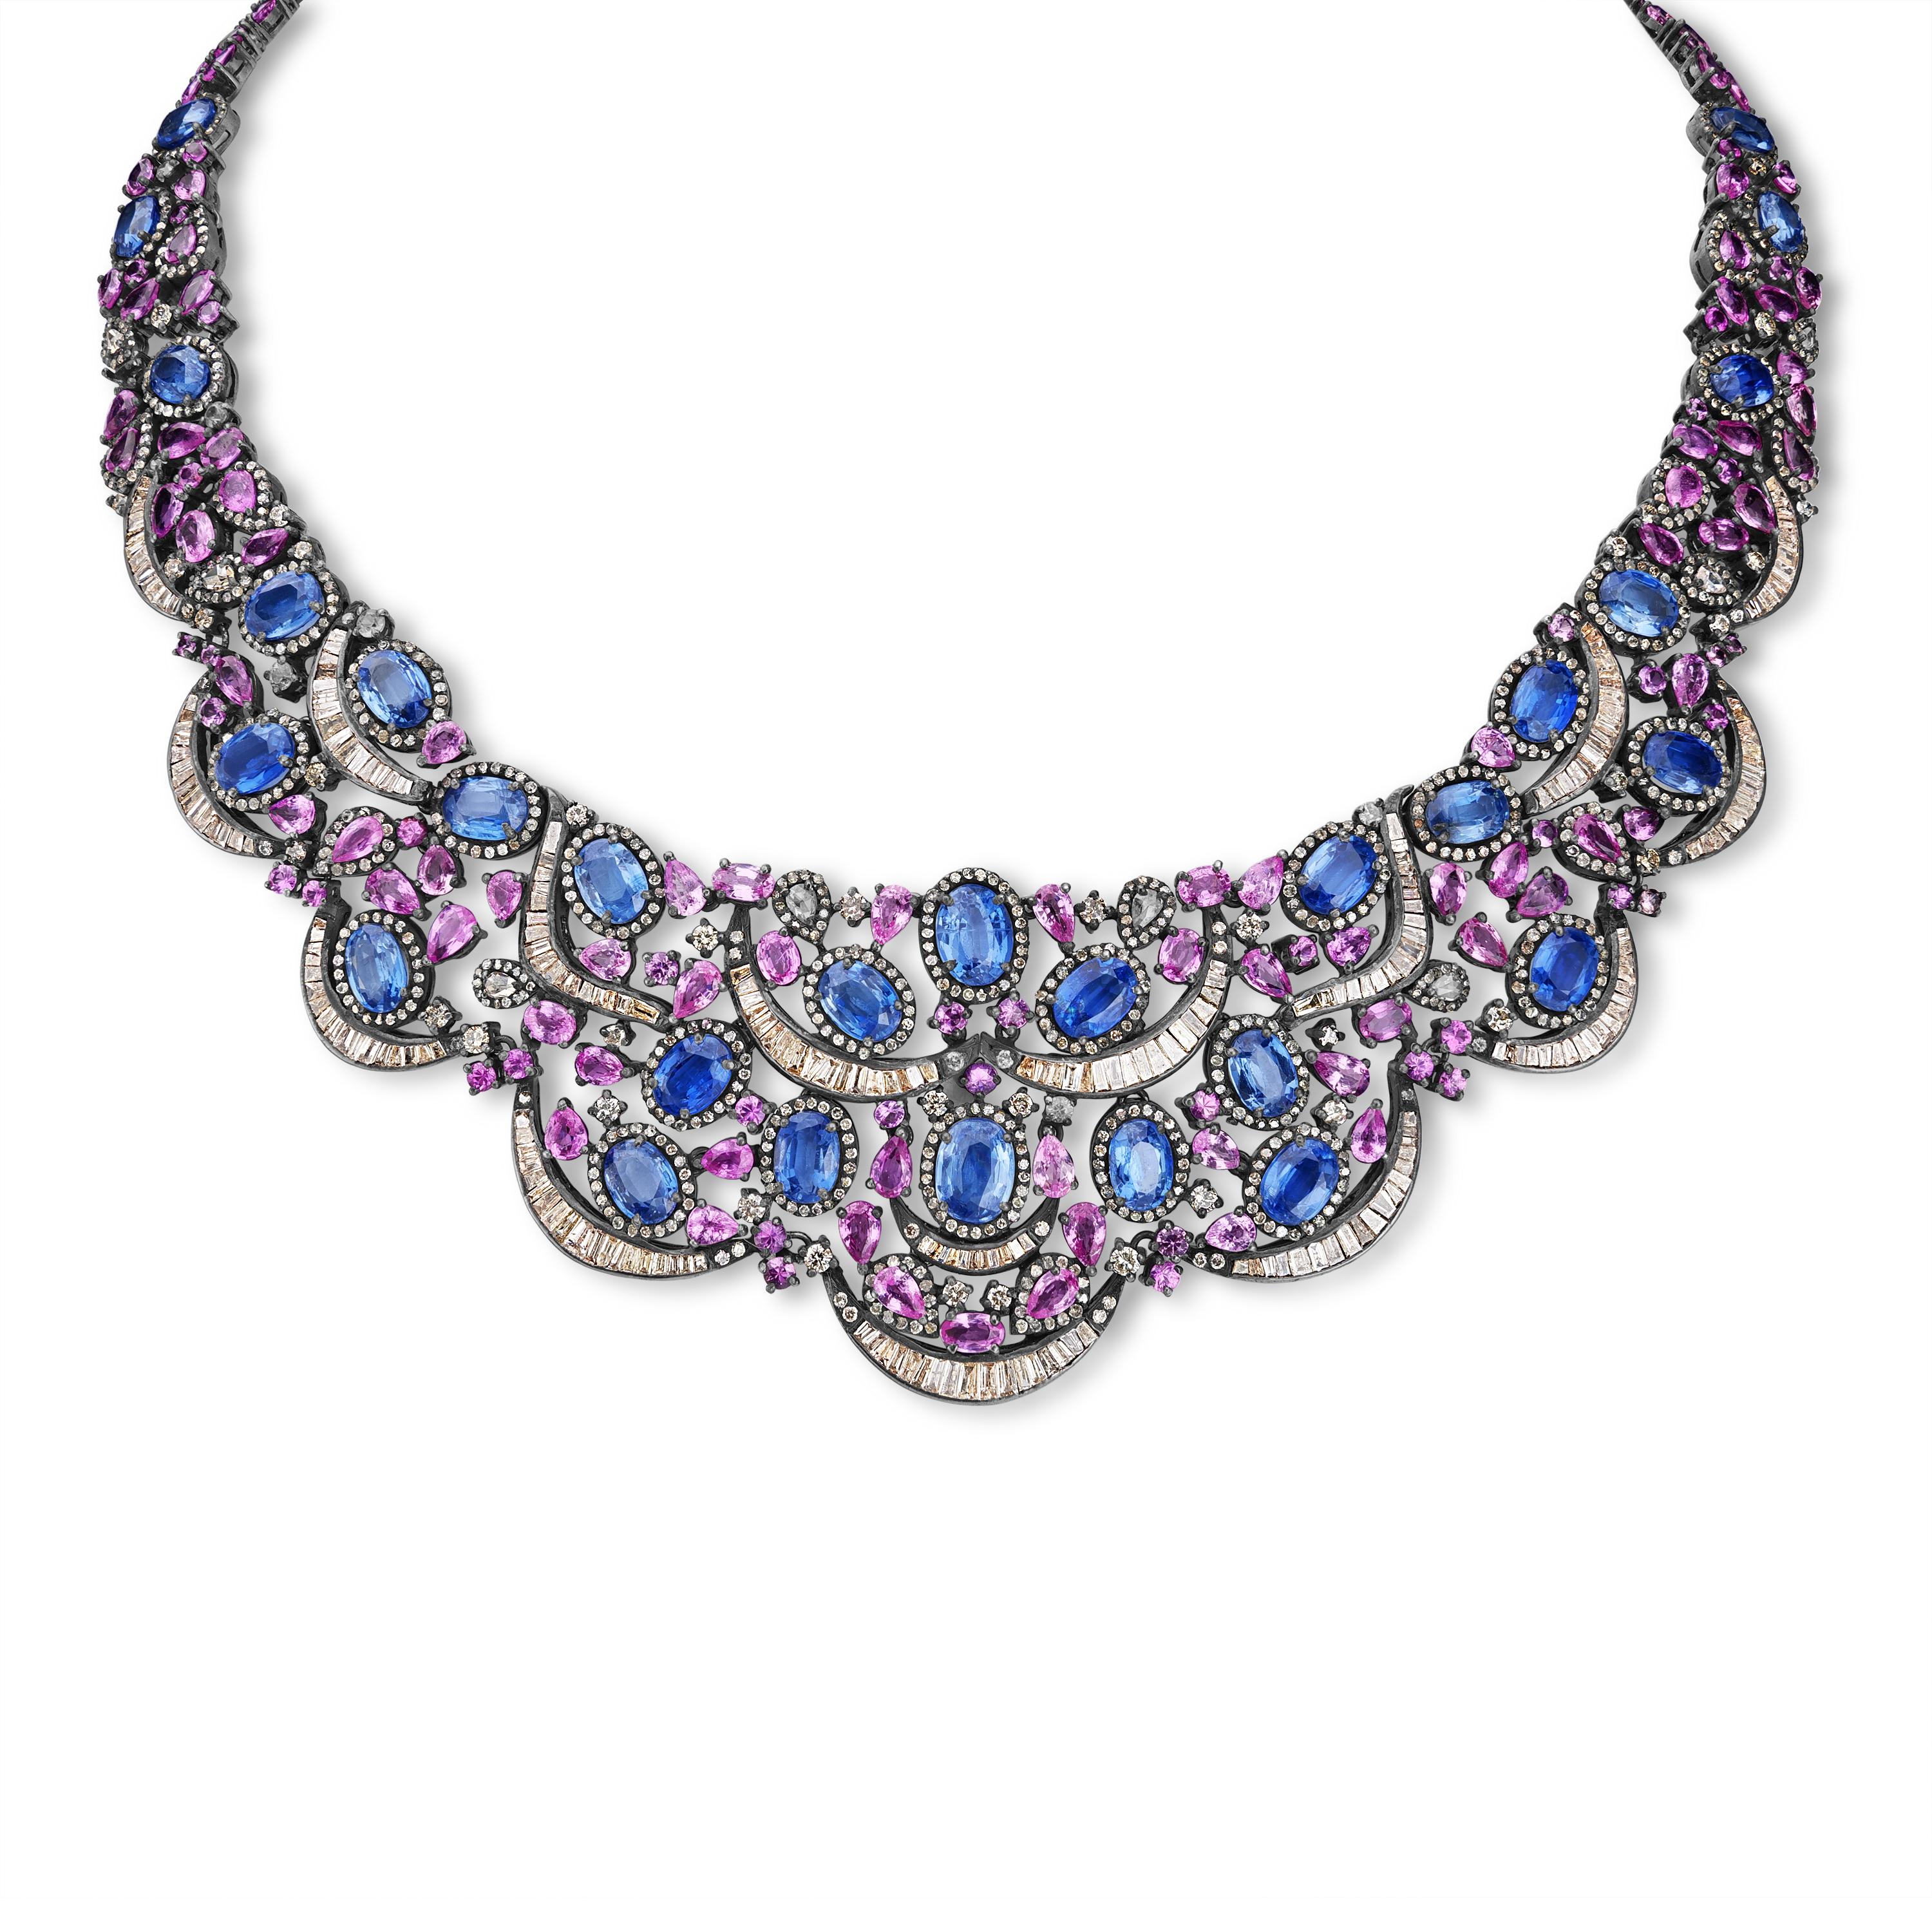 Unveil the epitome of luxury with our Victorian 82 Cttw. Kyanite, Pink Sapphire, and Diamond Choker Necklace. This opulent piece is a masterpiece of craftsmanship and design, blending the classic elegance of Victorian aesthetics with modern